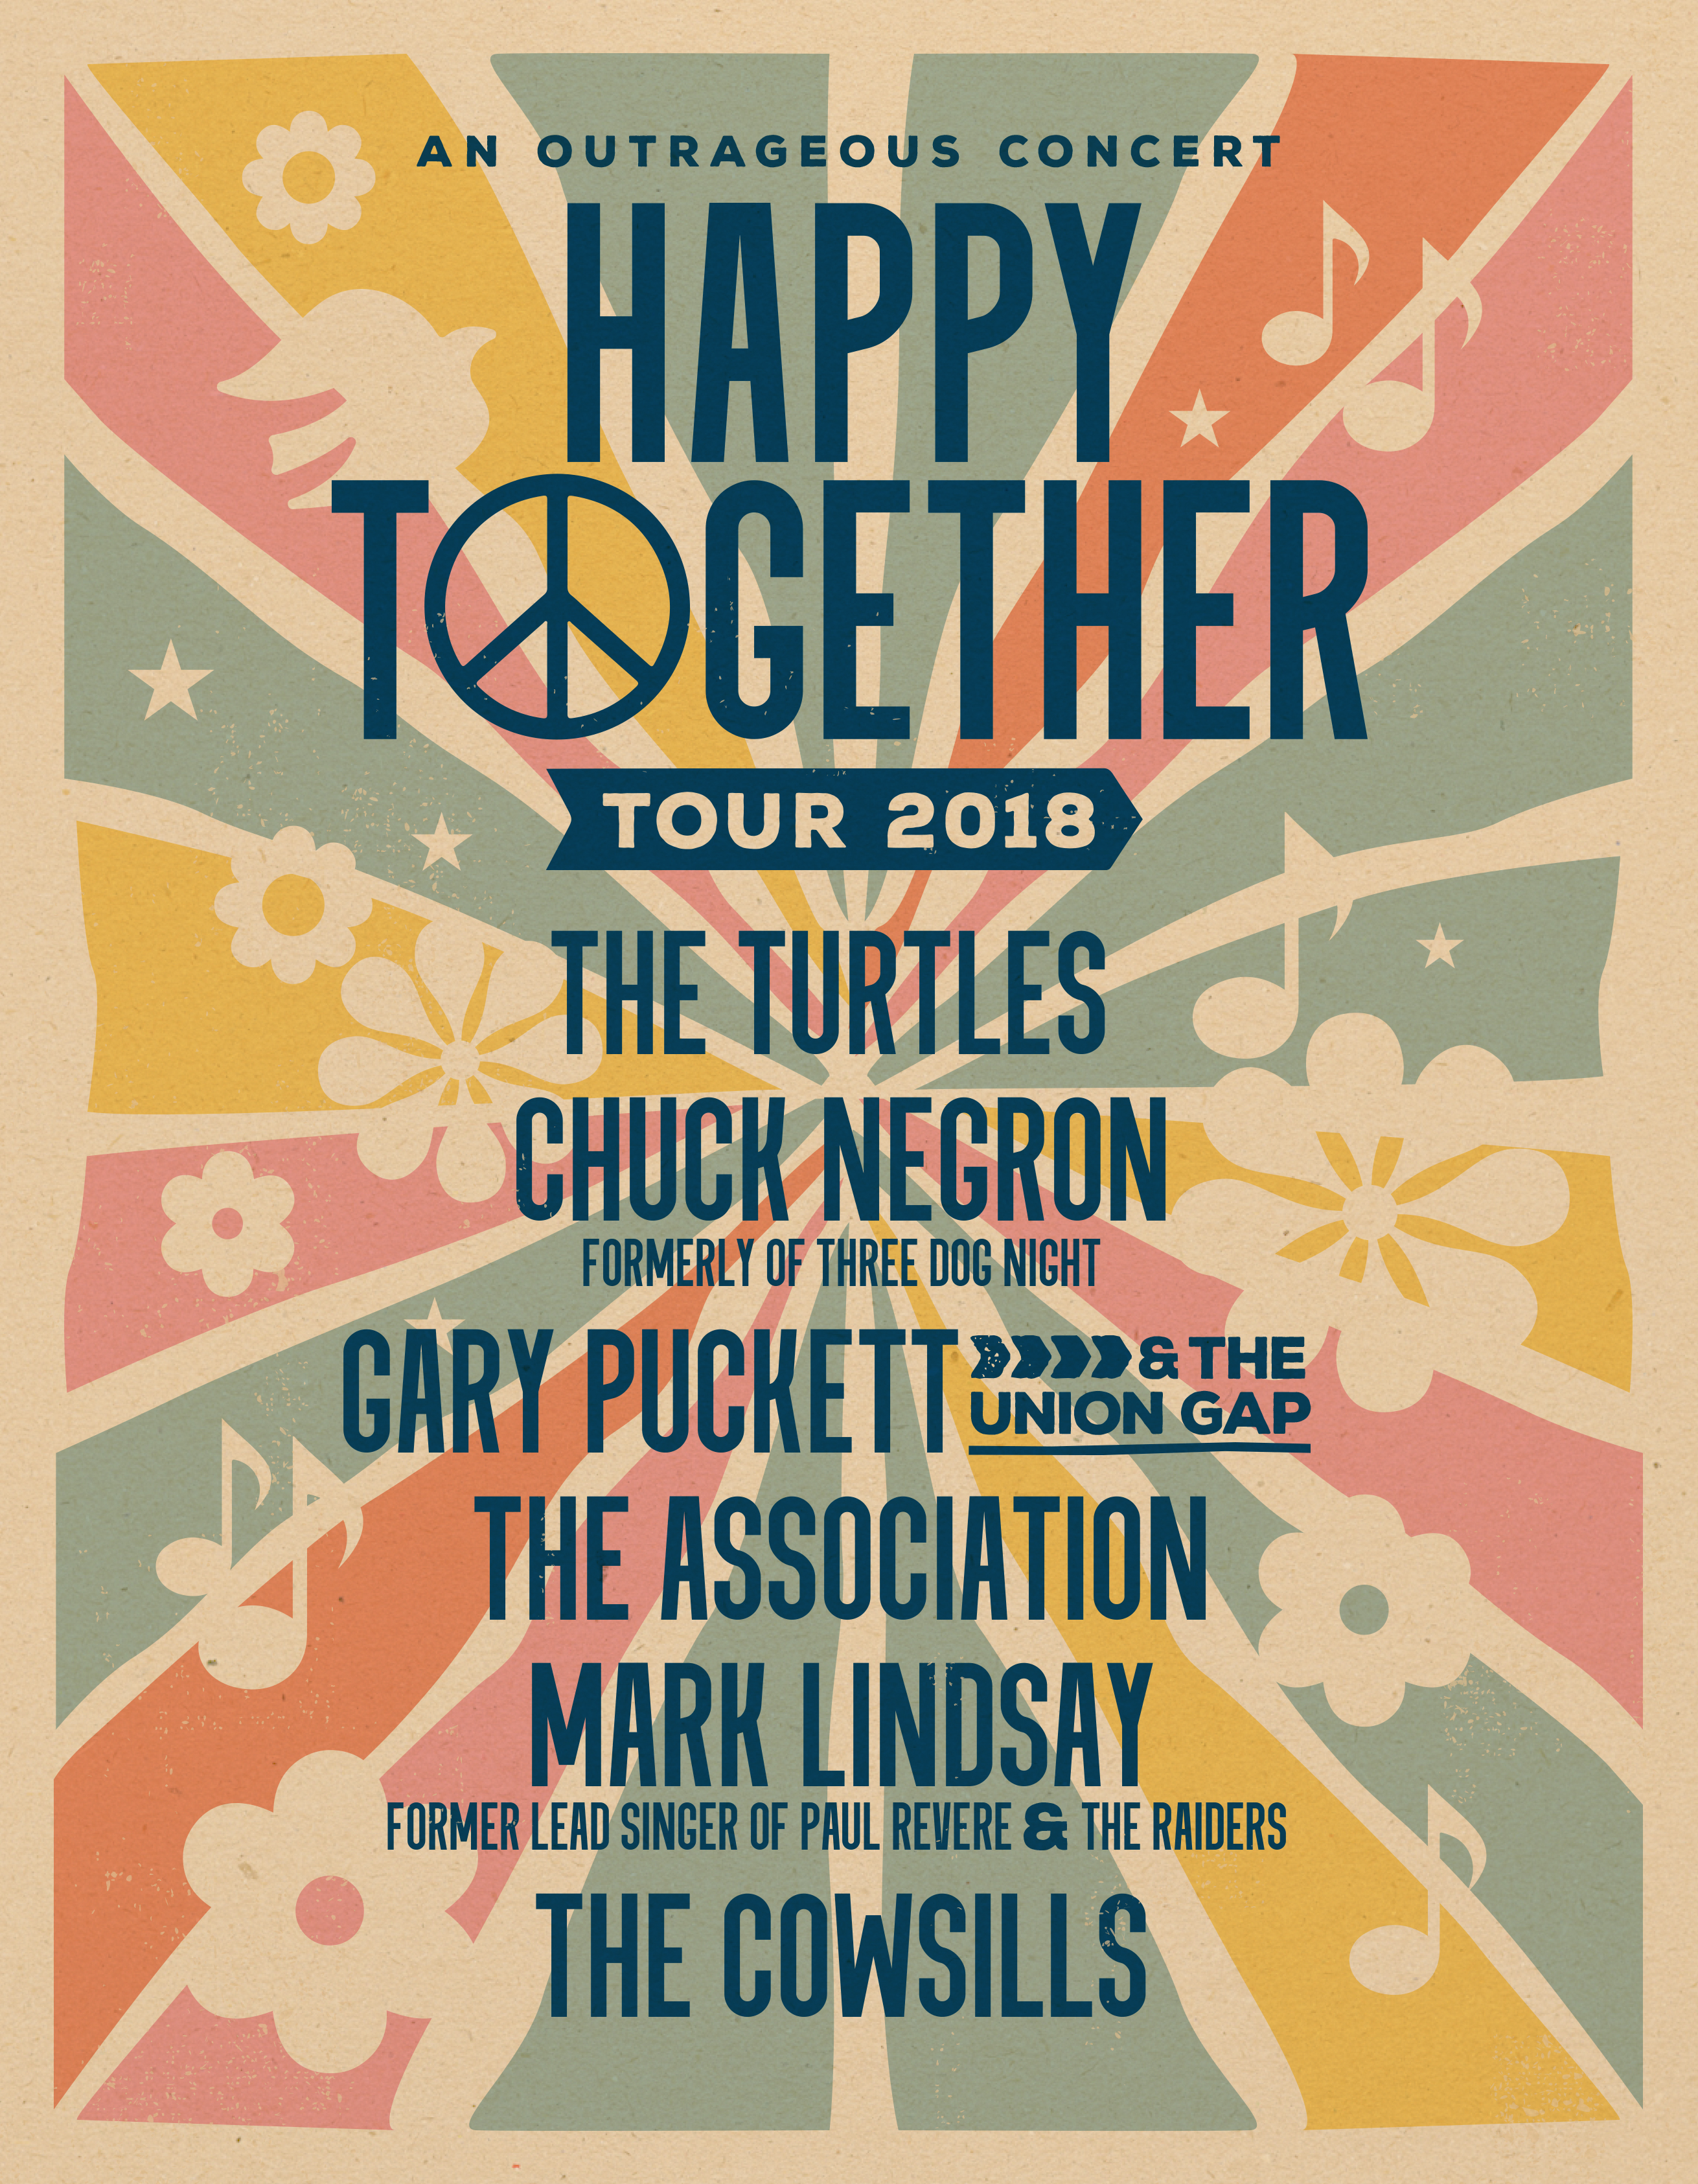 Happy Together 2018 Tour, Lineup Announced | Best Classic Bands